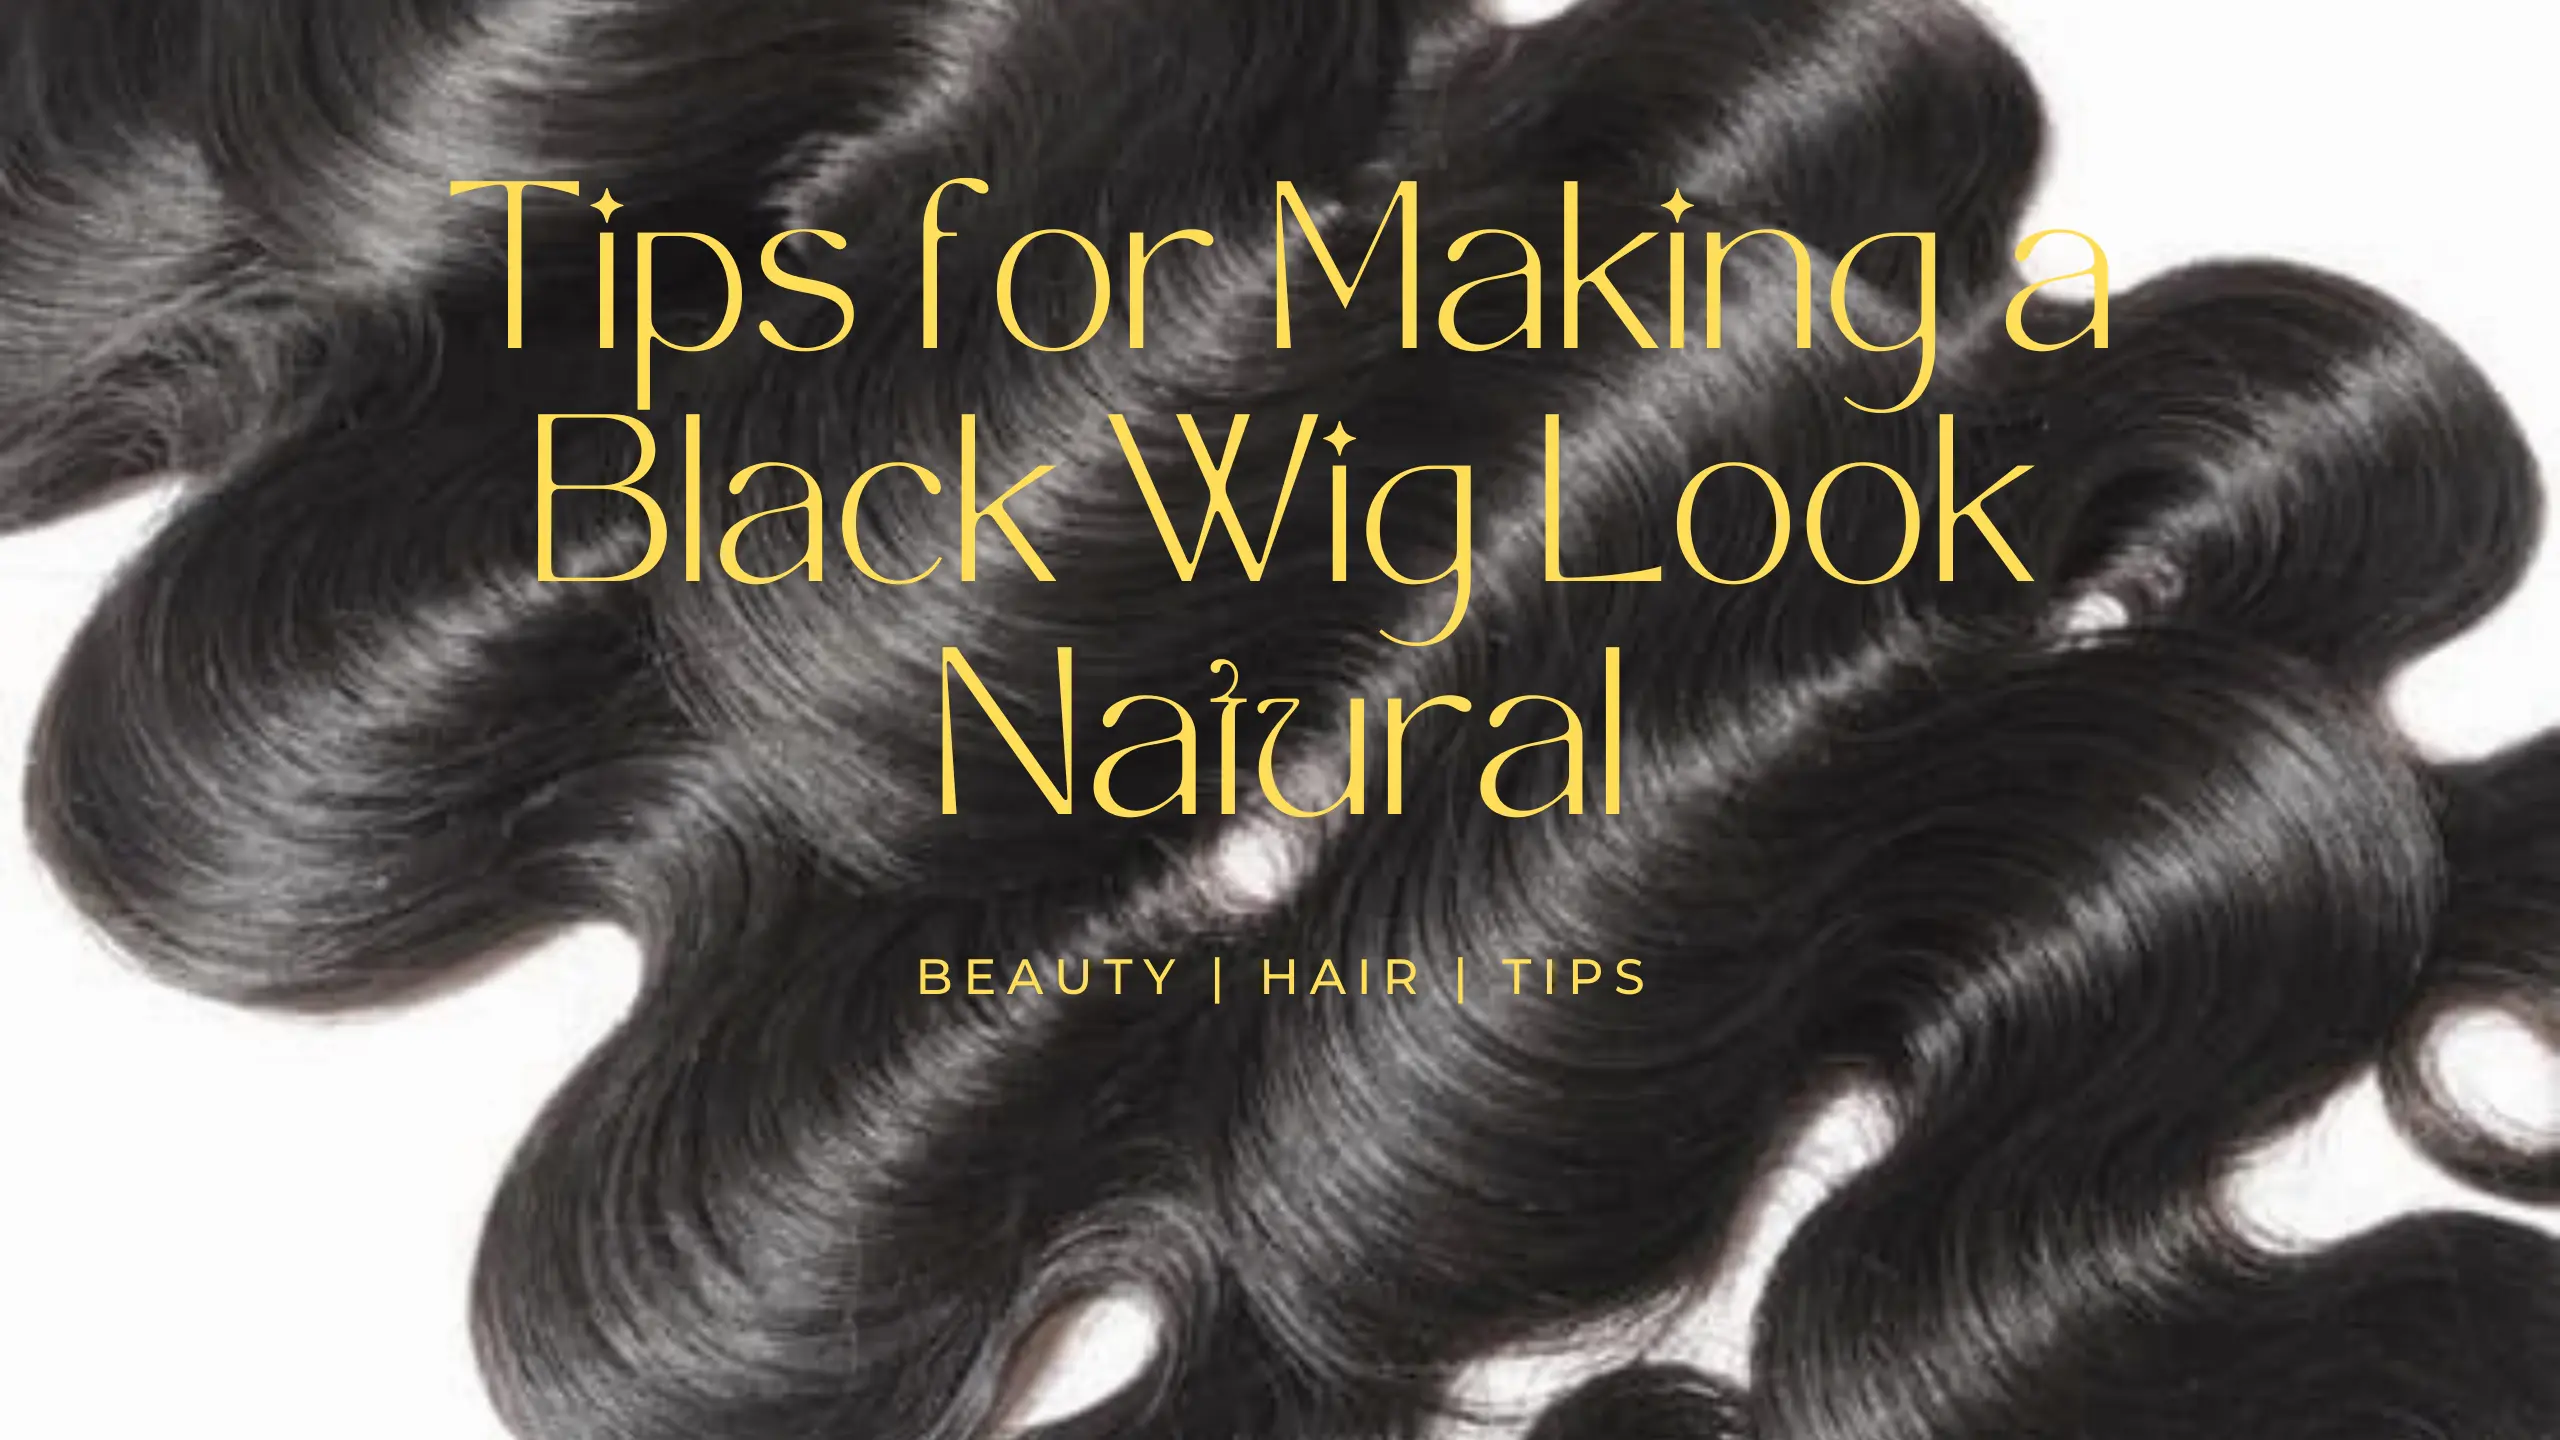 Tips for Making a Black Wig Look Natural